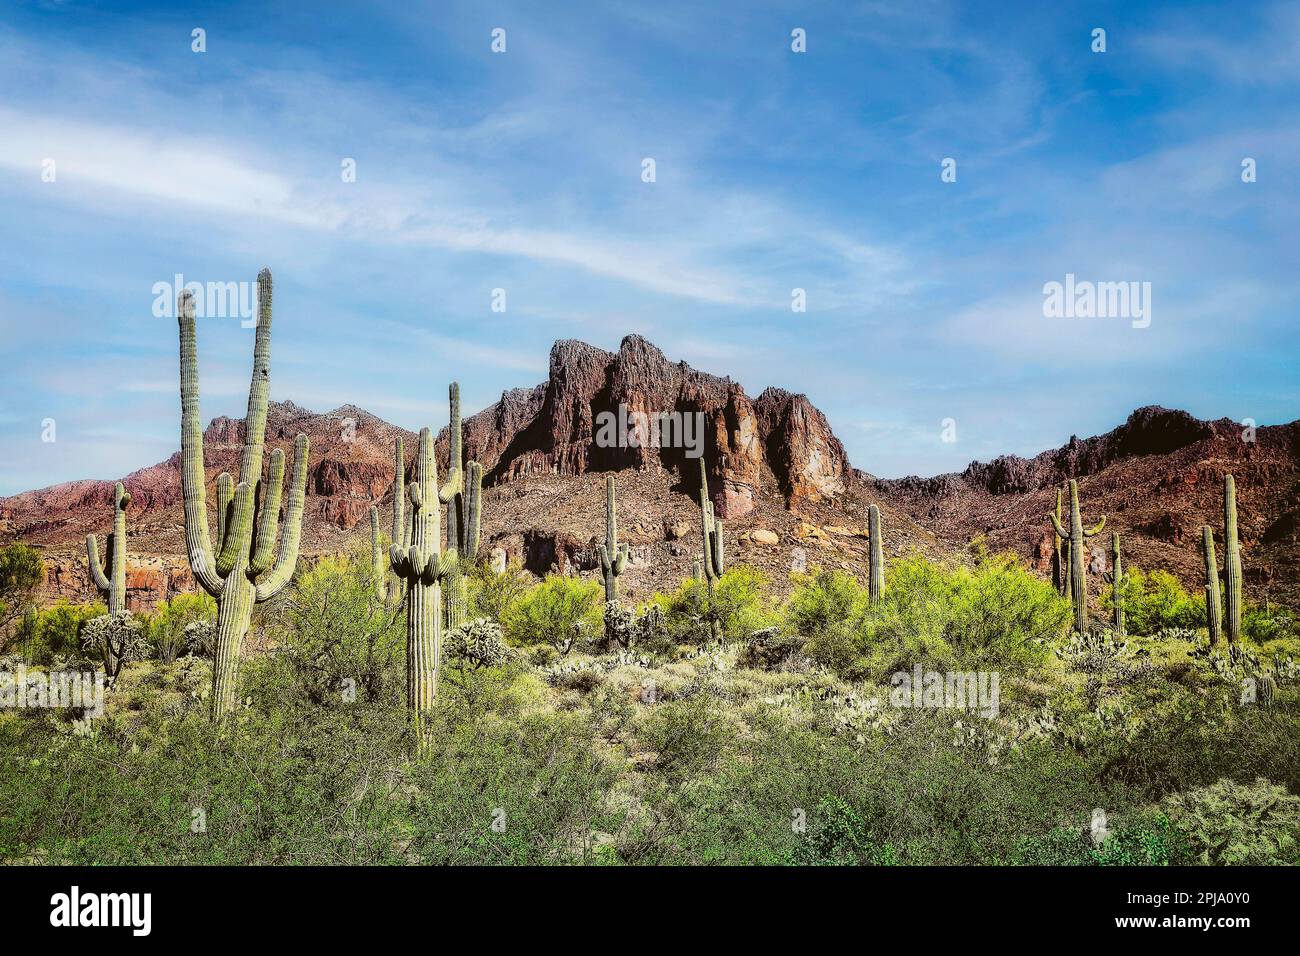 Sonoran desert landscape in the Superstition Mountains of Arizona. Stock Photo